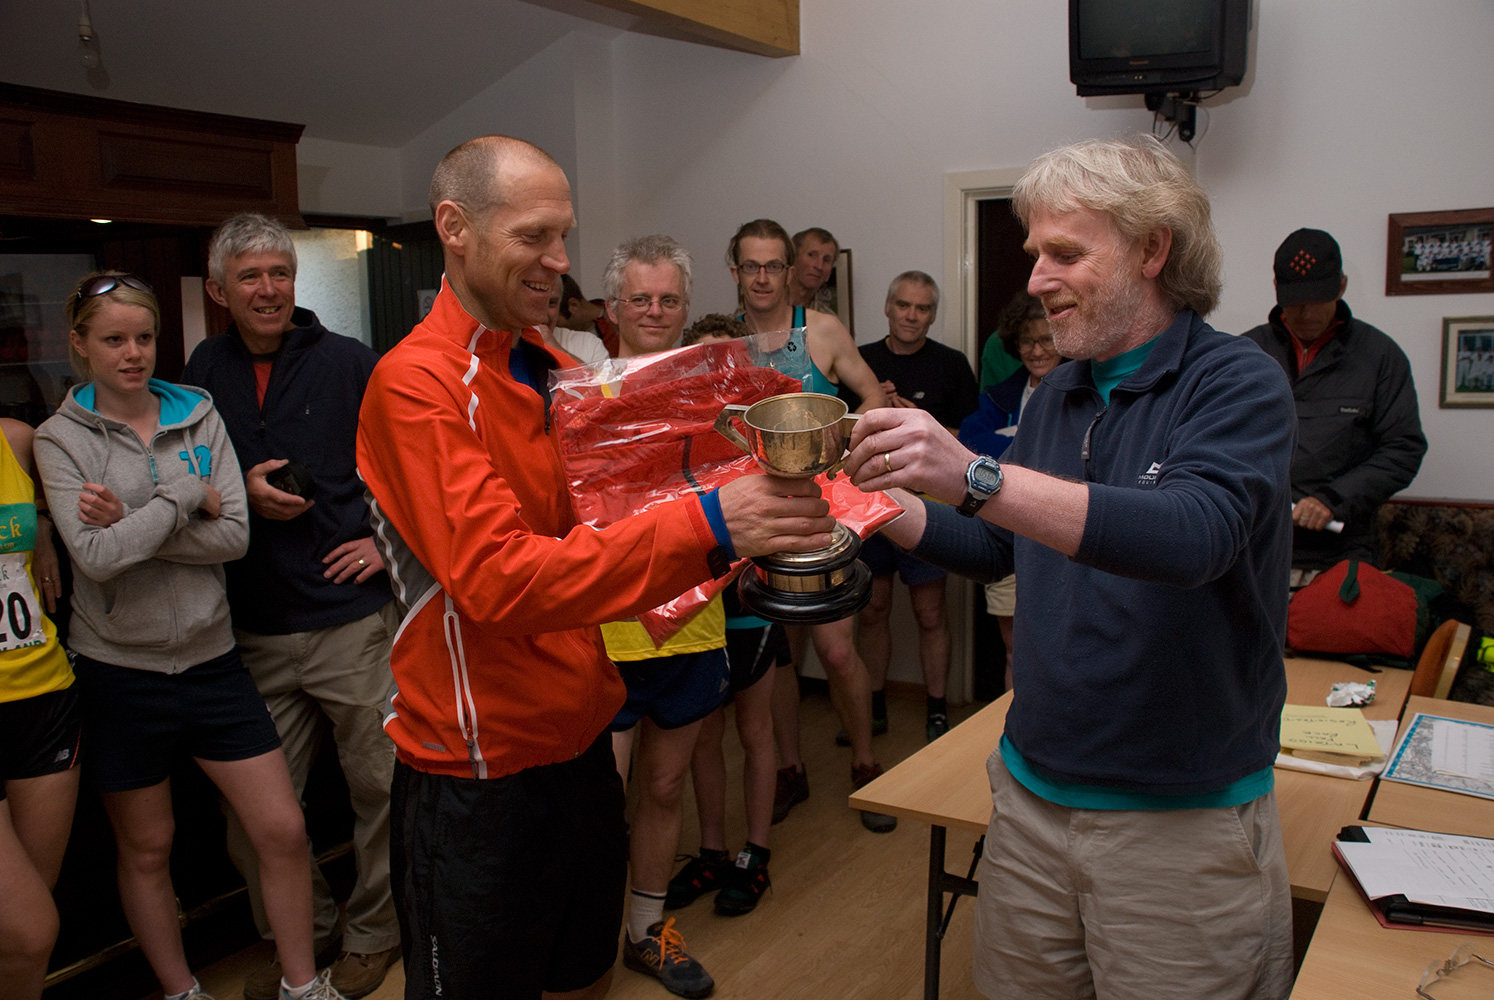 Receiving his trophy after winning the Latrigg Fell Race at the Keswick Mountain Festival in 2008. Simon won the British Fell Running Championship in 2002 & 2005 and came 2nd in the World Skyrunning Series in 2005.